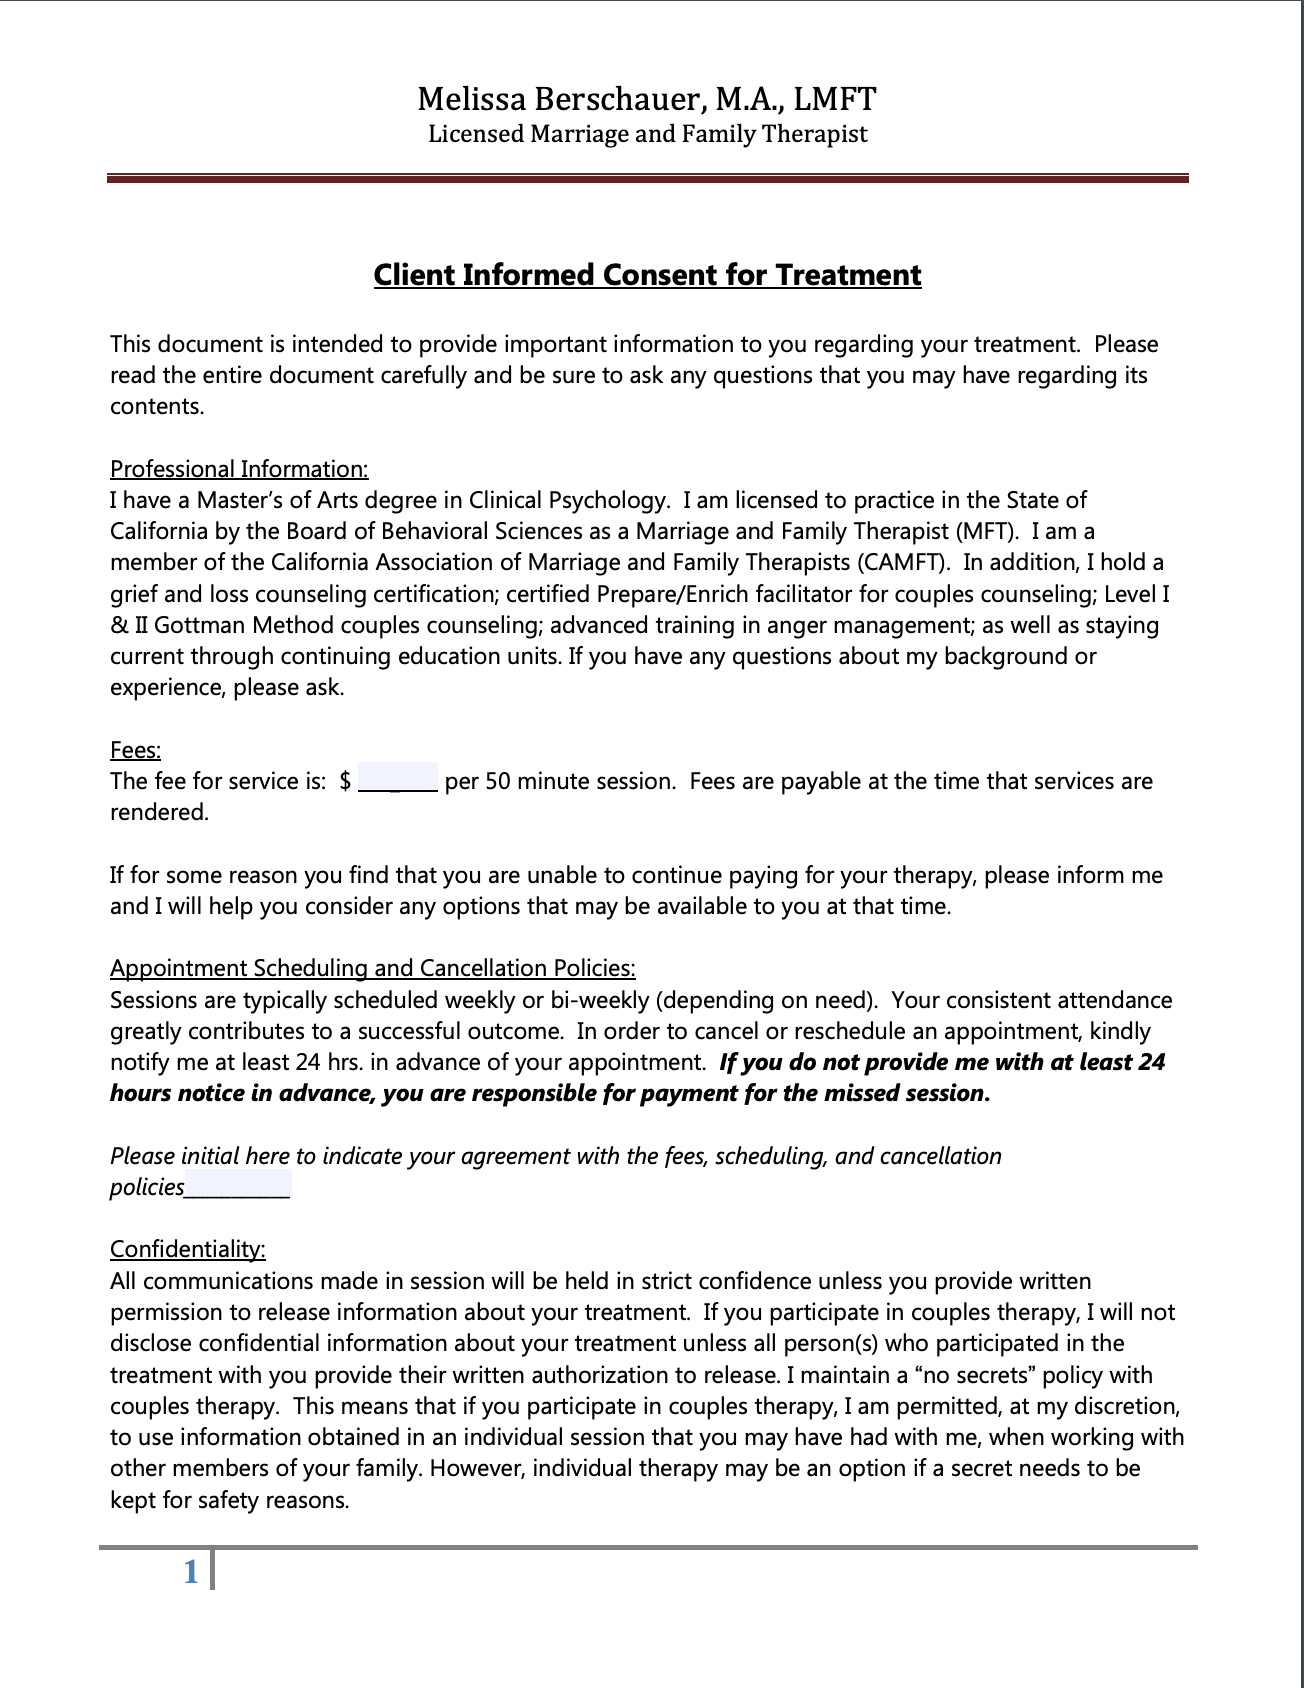 Client Informed Consent Form